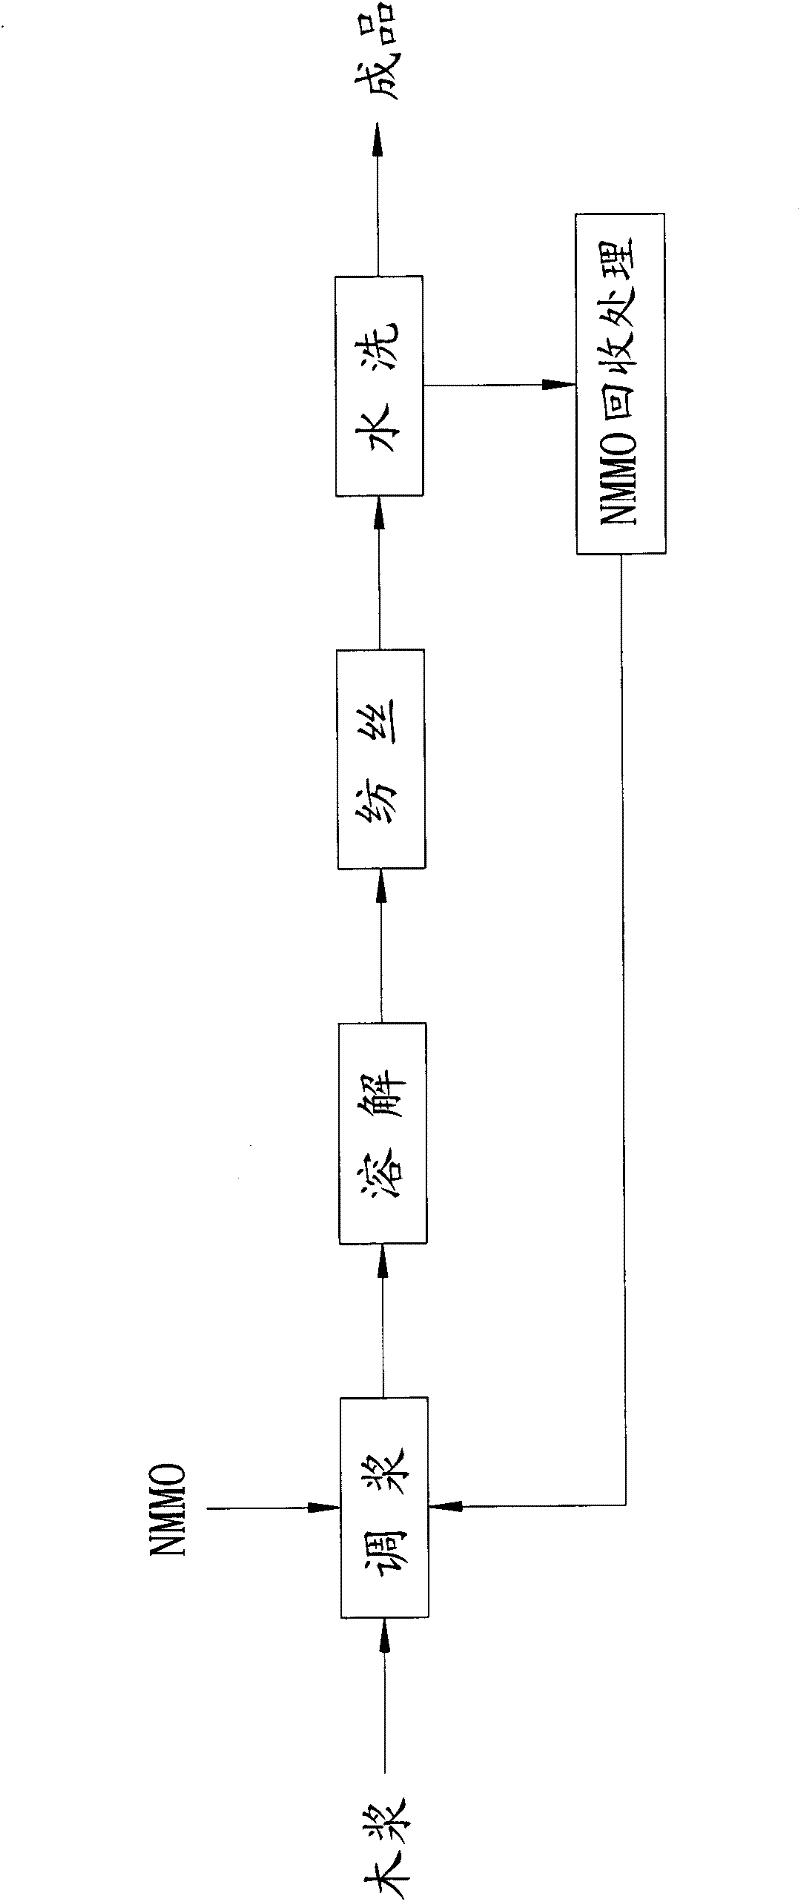 Solvent recovery method of Lyocell fibers